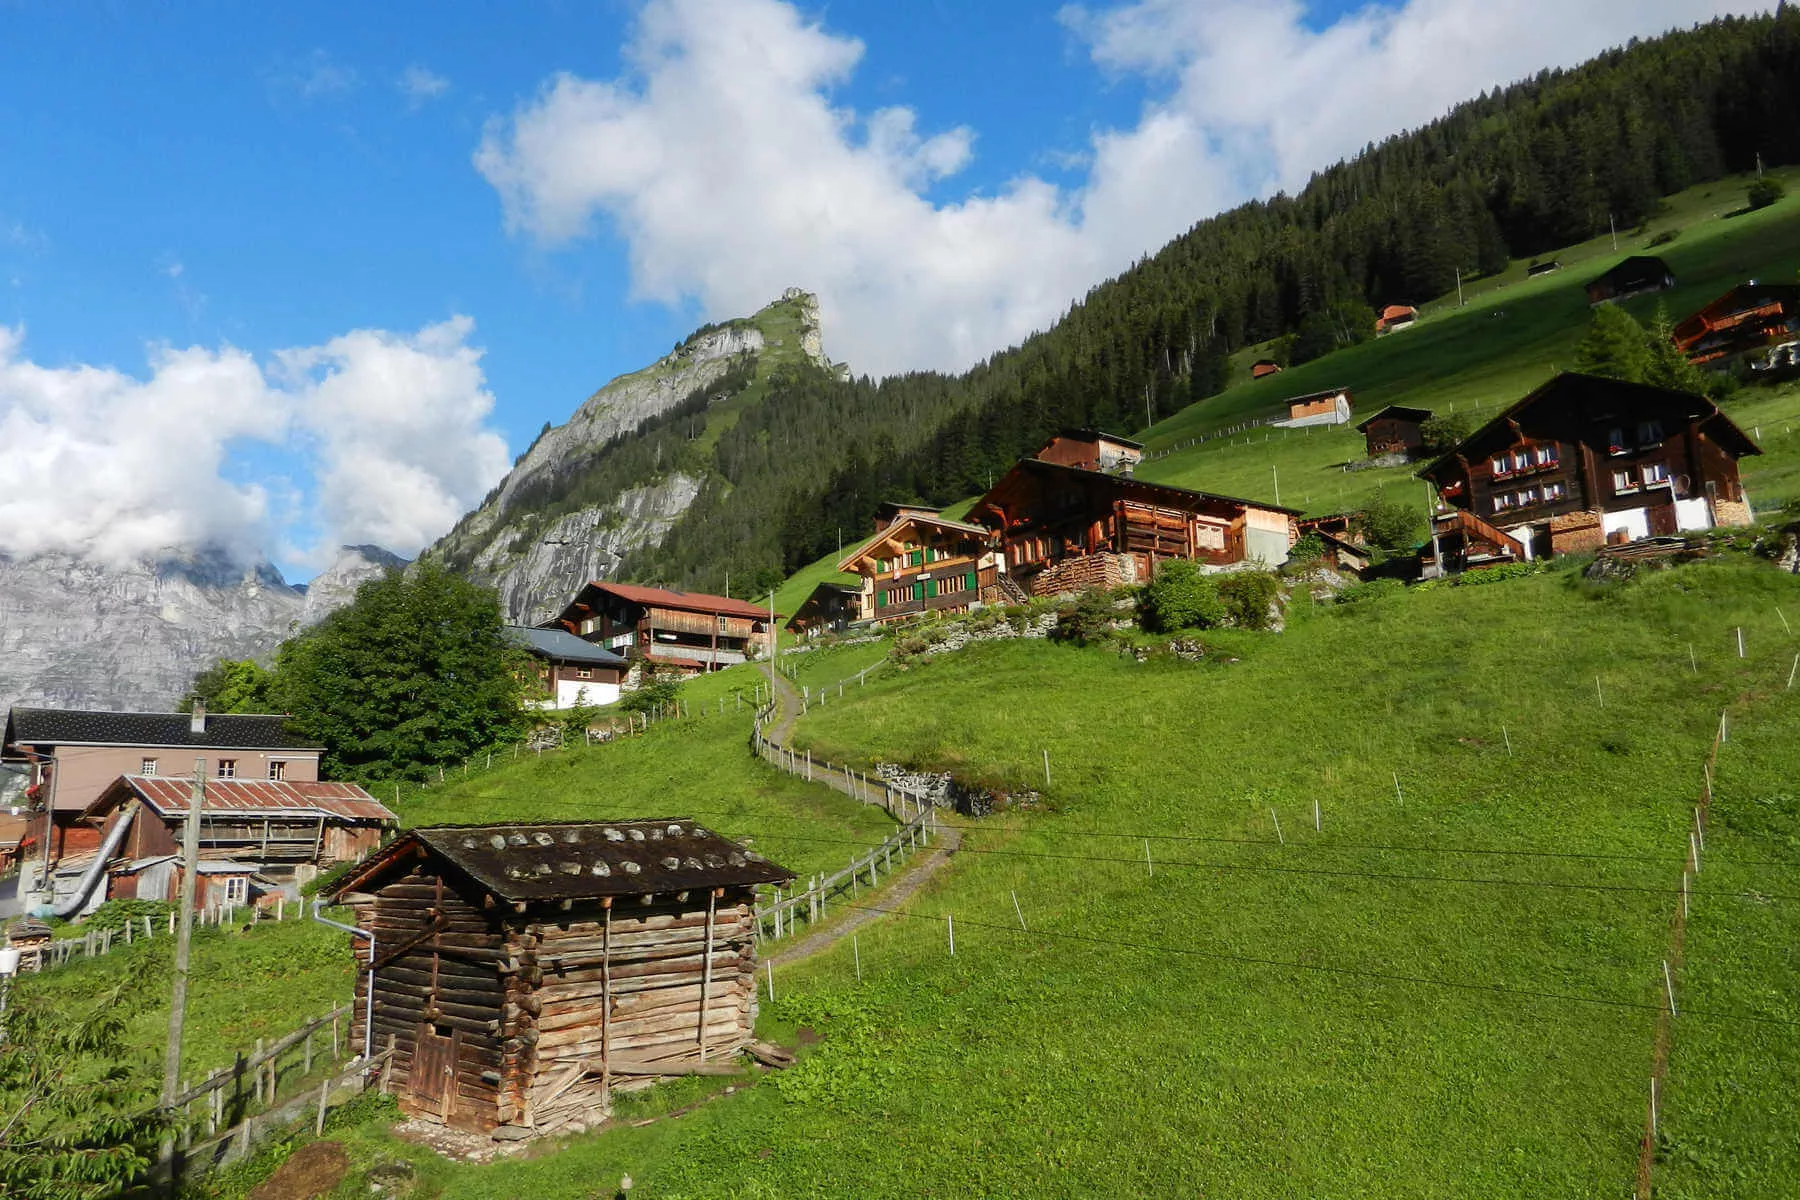 The little village of Gimmelwald, high in the Swiss Alps, is one of my all-time favorite European destinations